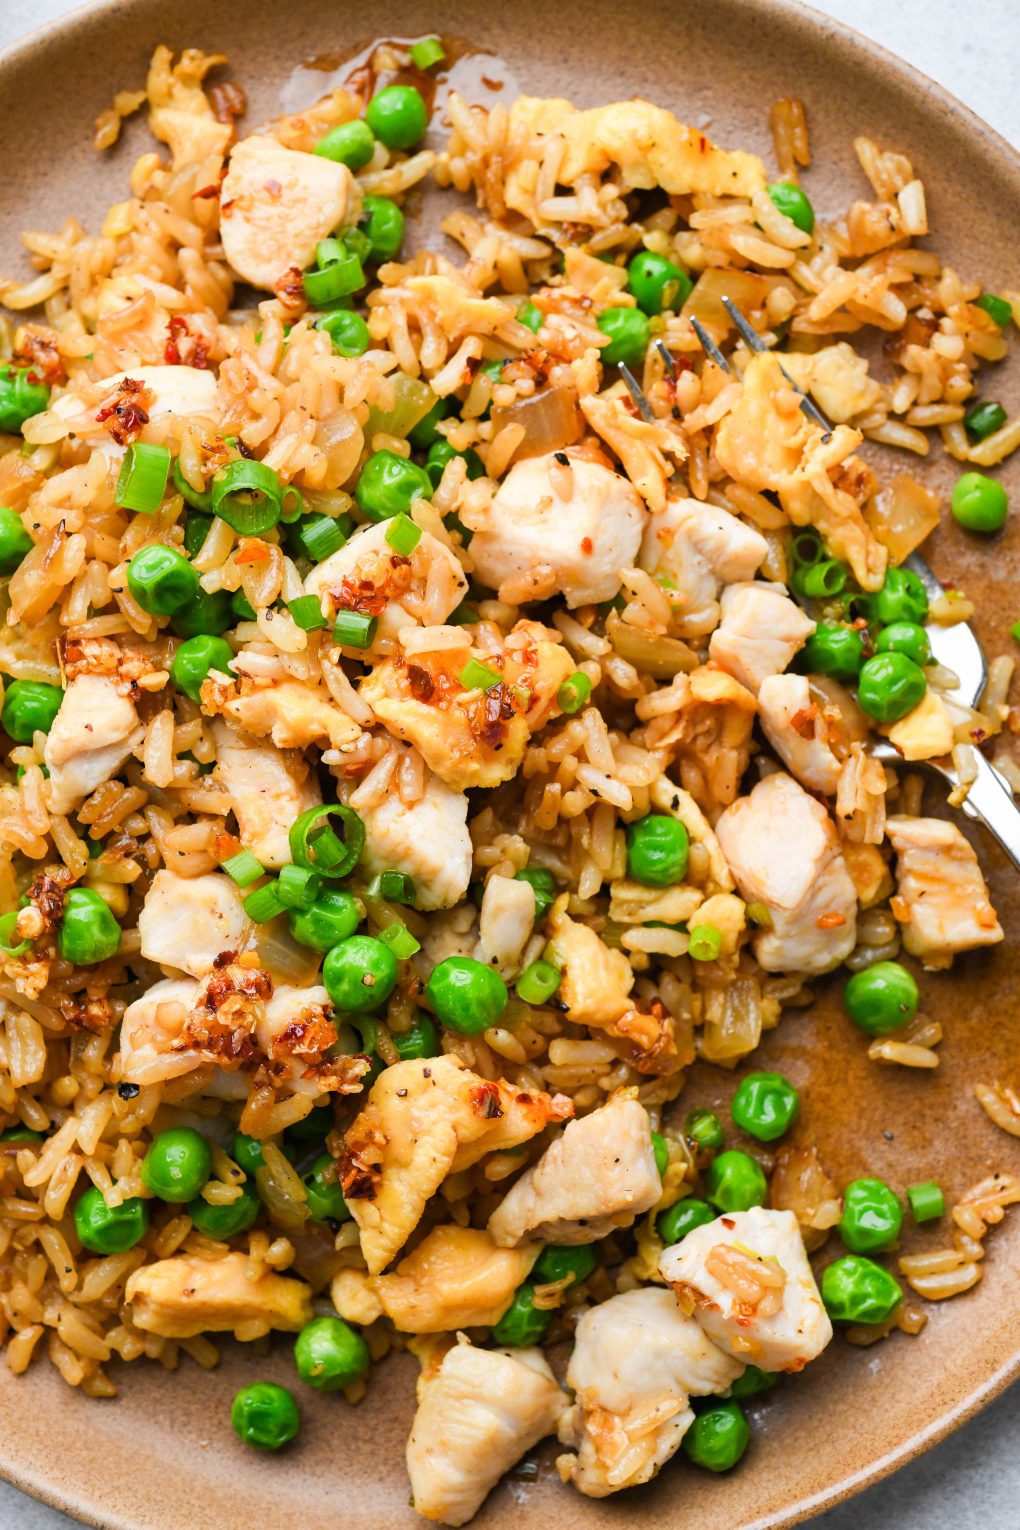 A plate of gluten free chicken fried rice garnished with green onions and chili oil, with  few bites taken out.